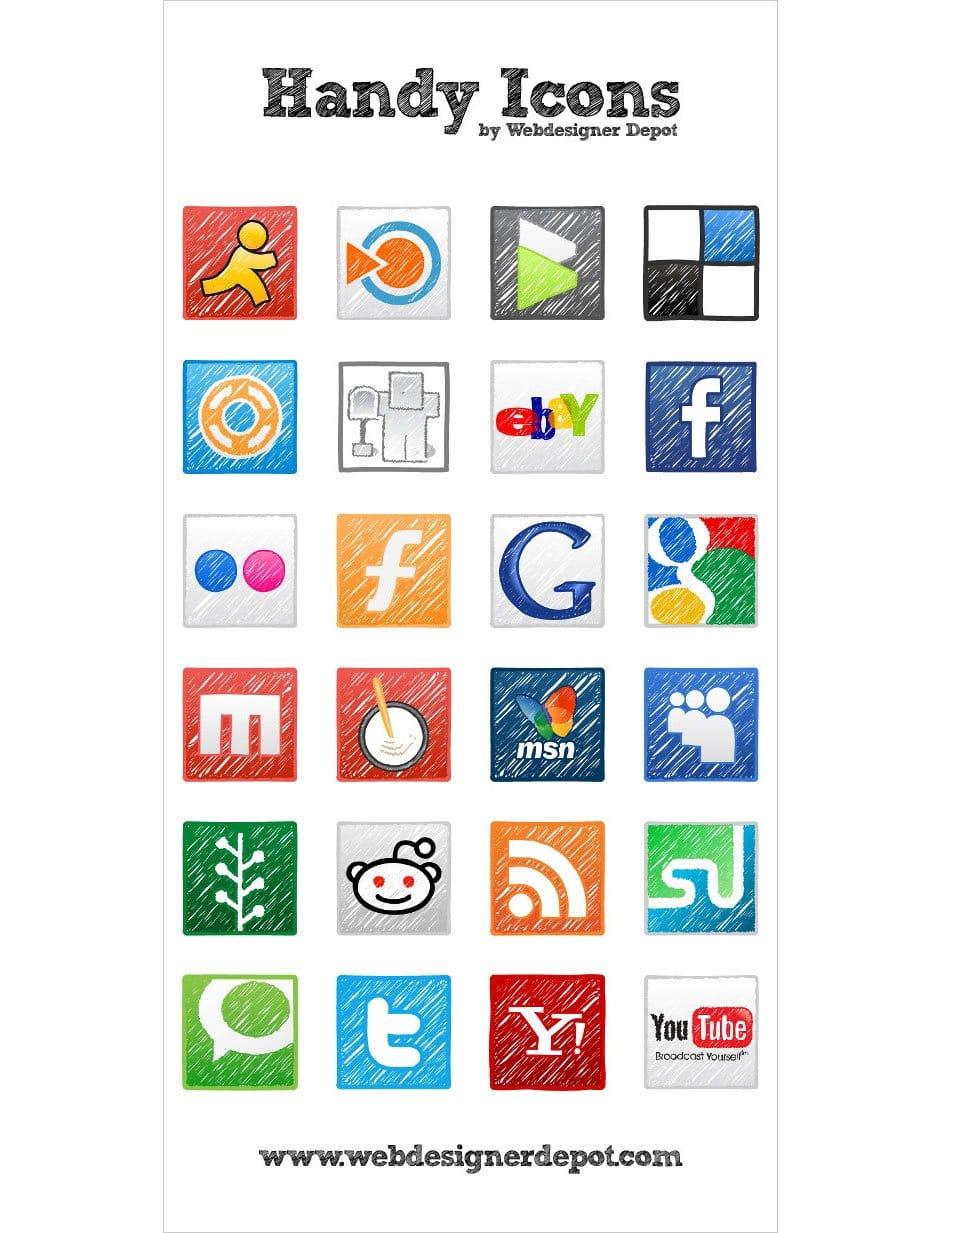 24 free and exclusive vector Handy icons